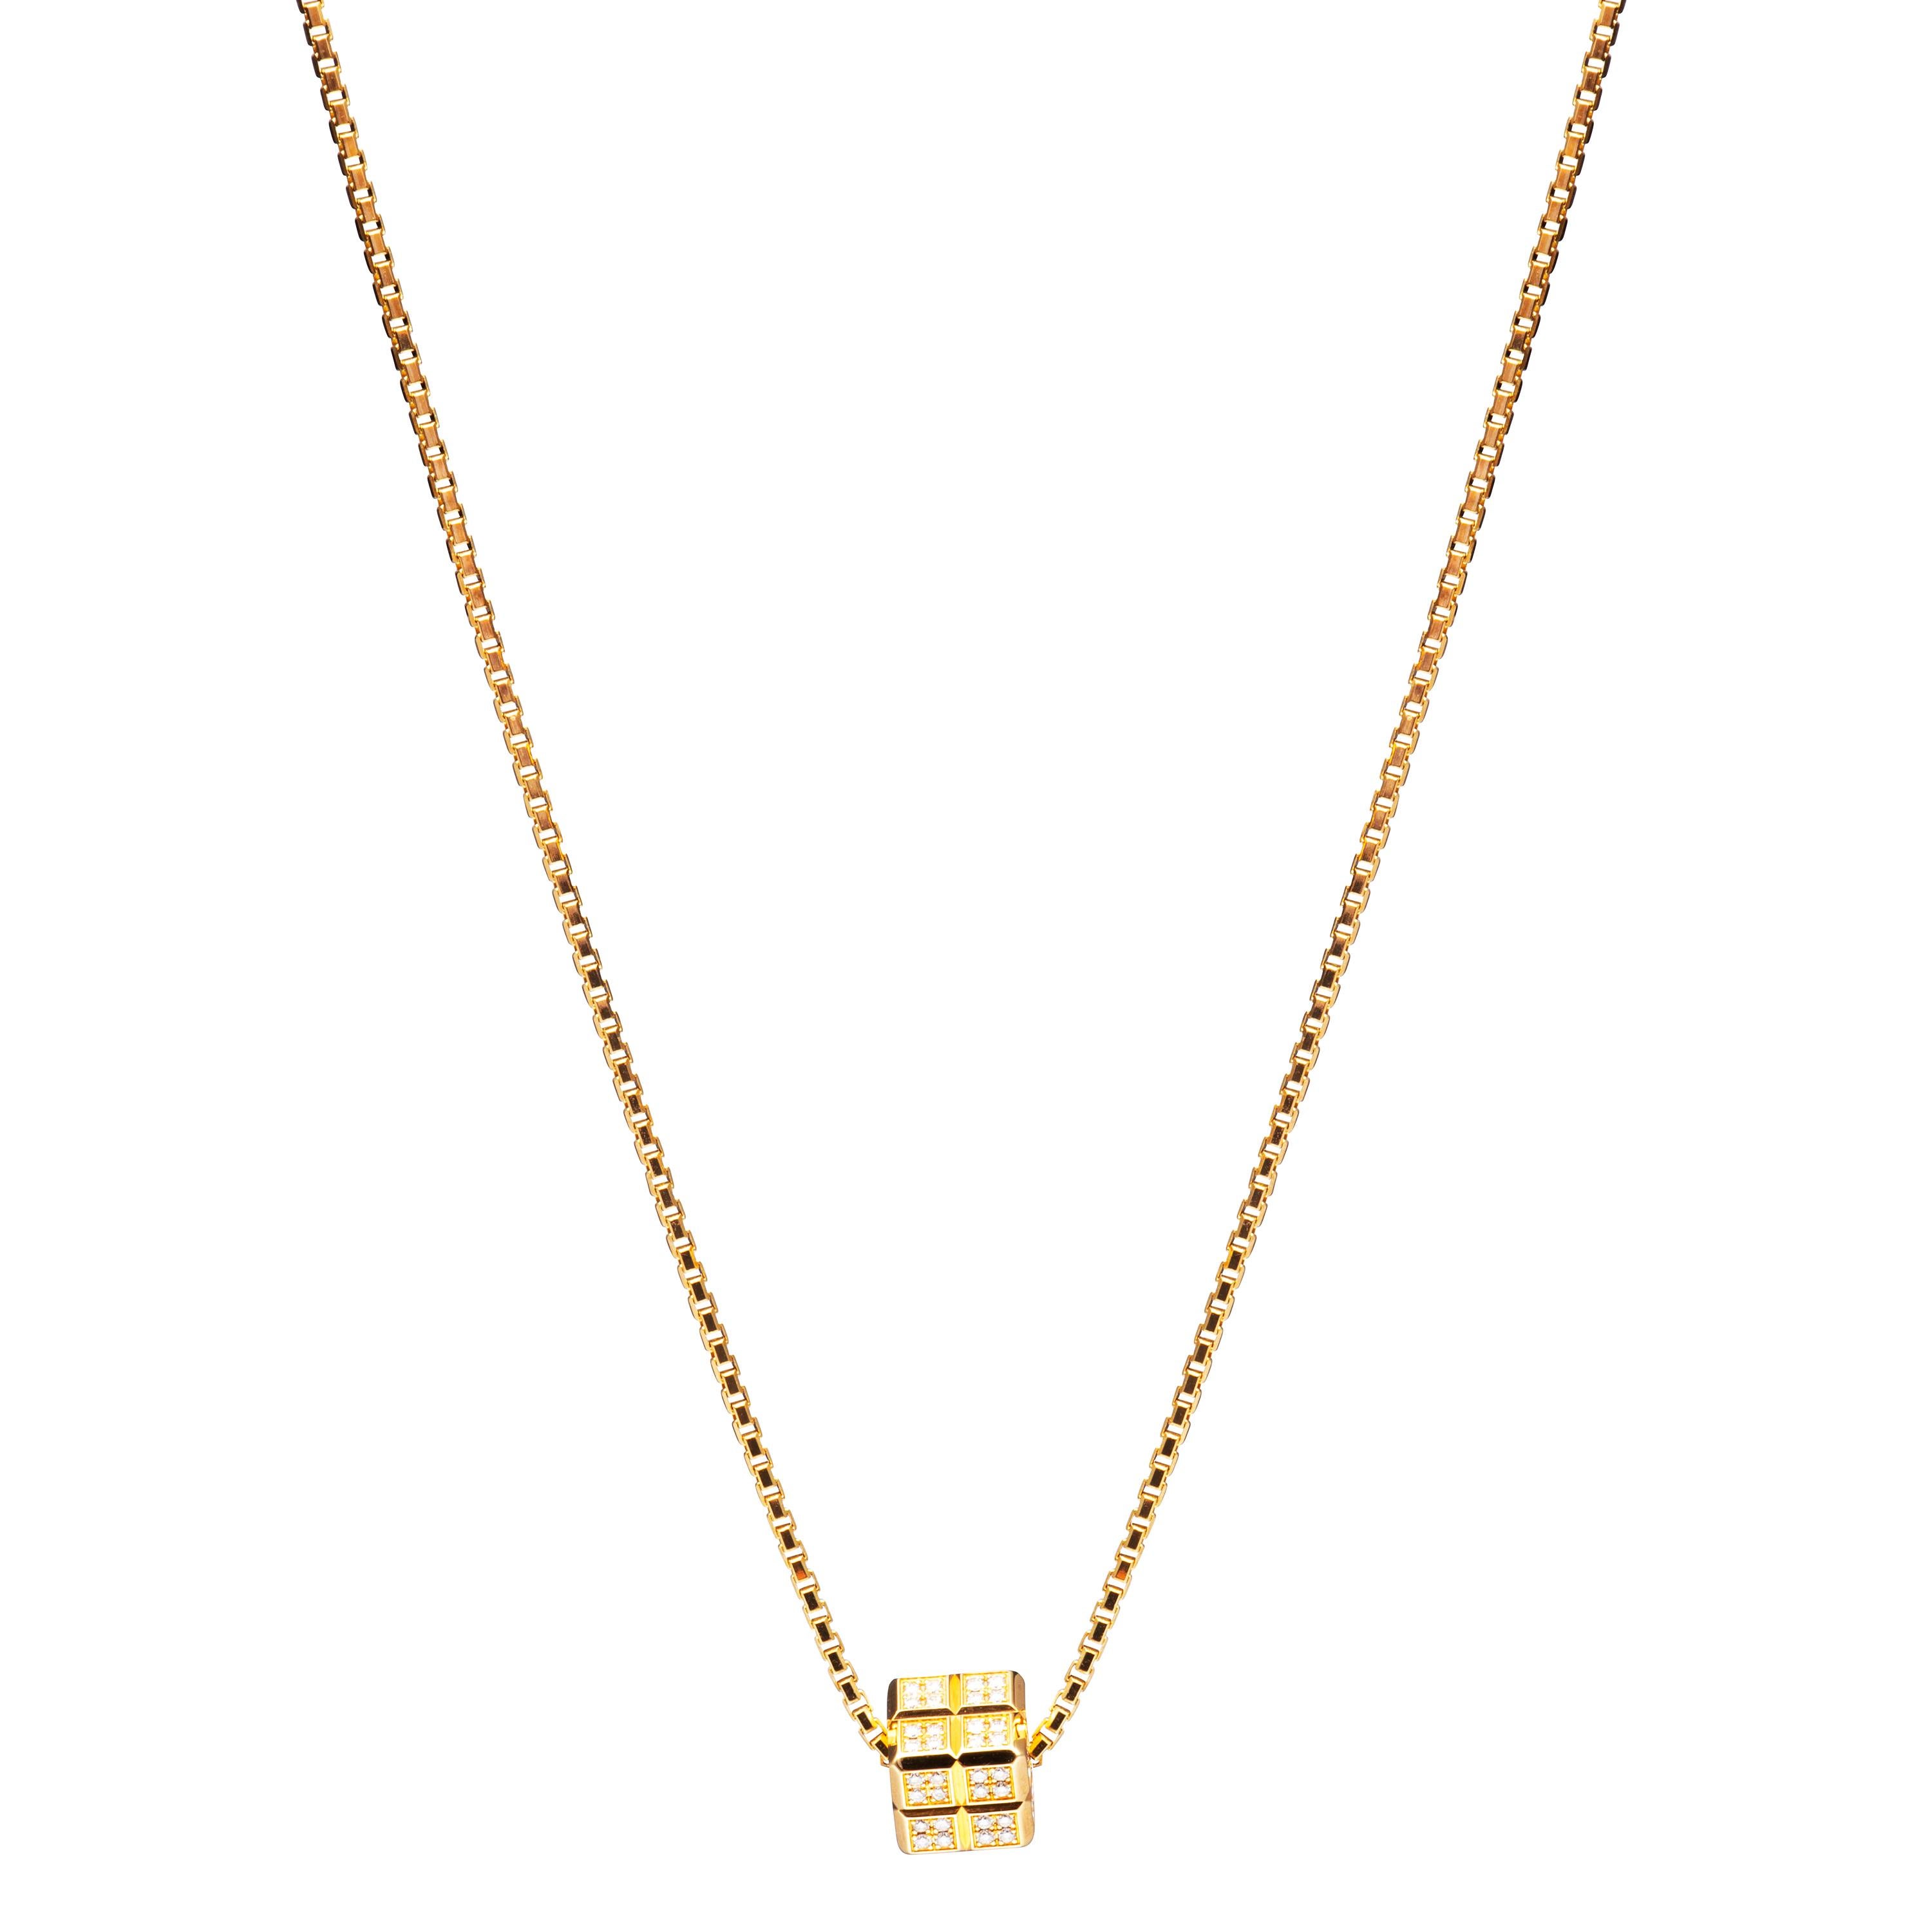 Chopard Ice Cube Pendant Necklace

Model Number: 79/6815-0001

100% Authentic

Brand New

Comes with original Chopard Box, Certificate of Authenticity and Warranty and Jewels Manual

18 Karat Yellow Gold (14.80gr)

92 Diamonds on the Pendant (.56